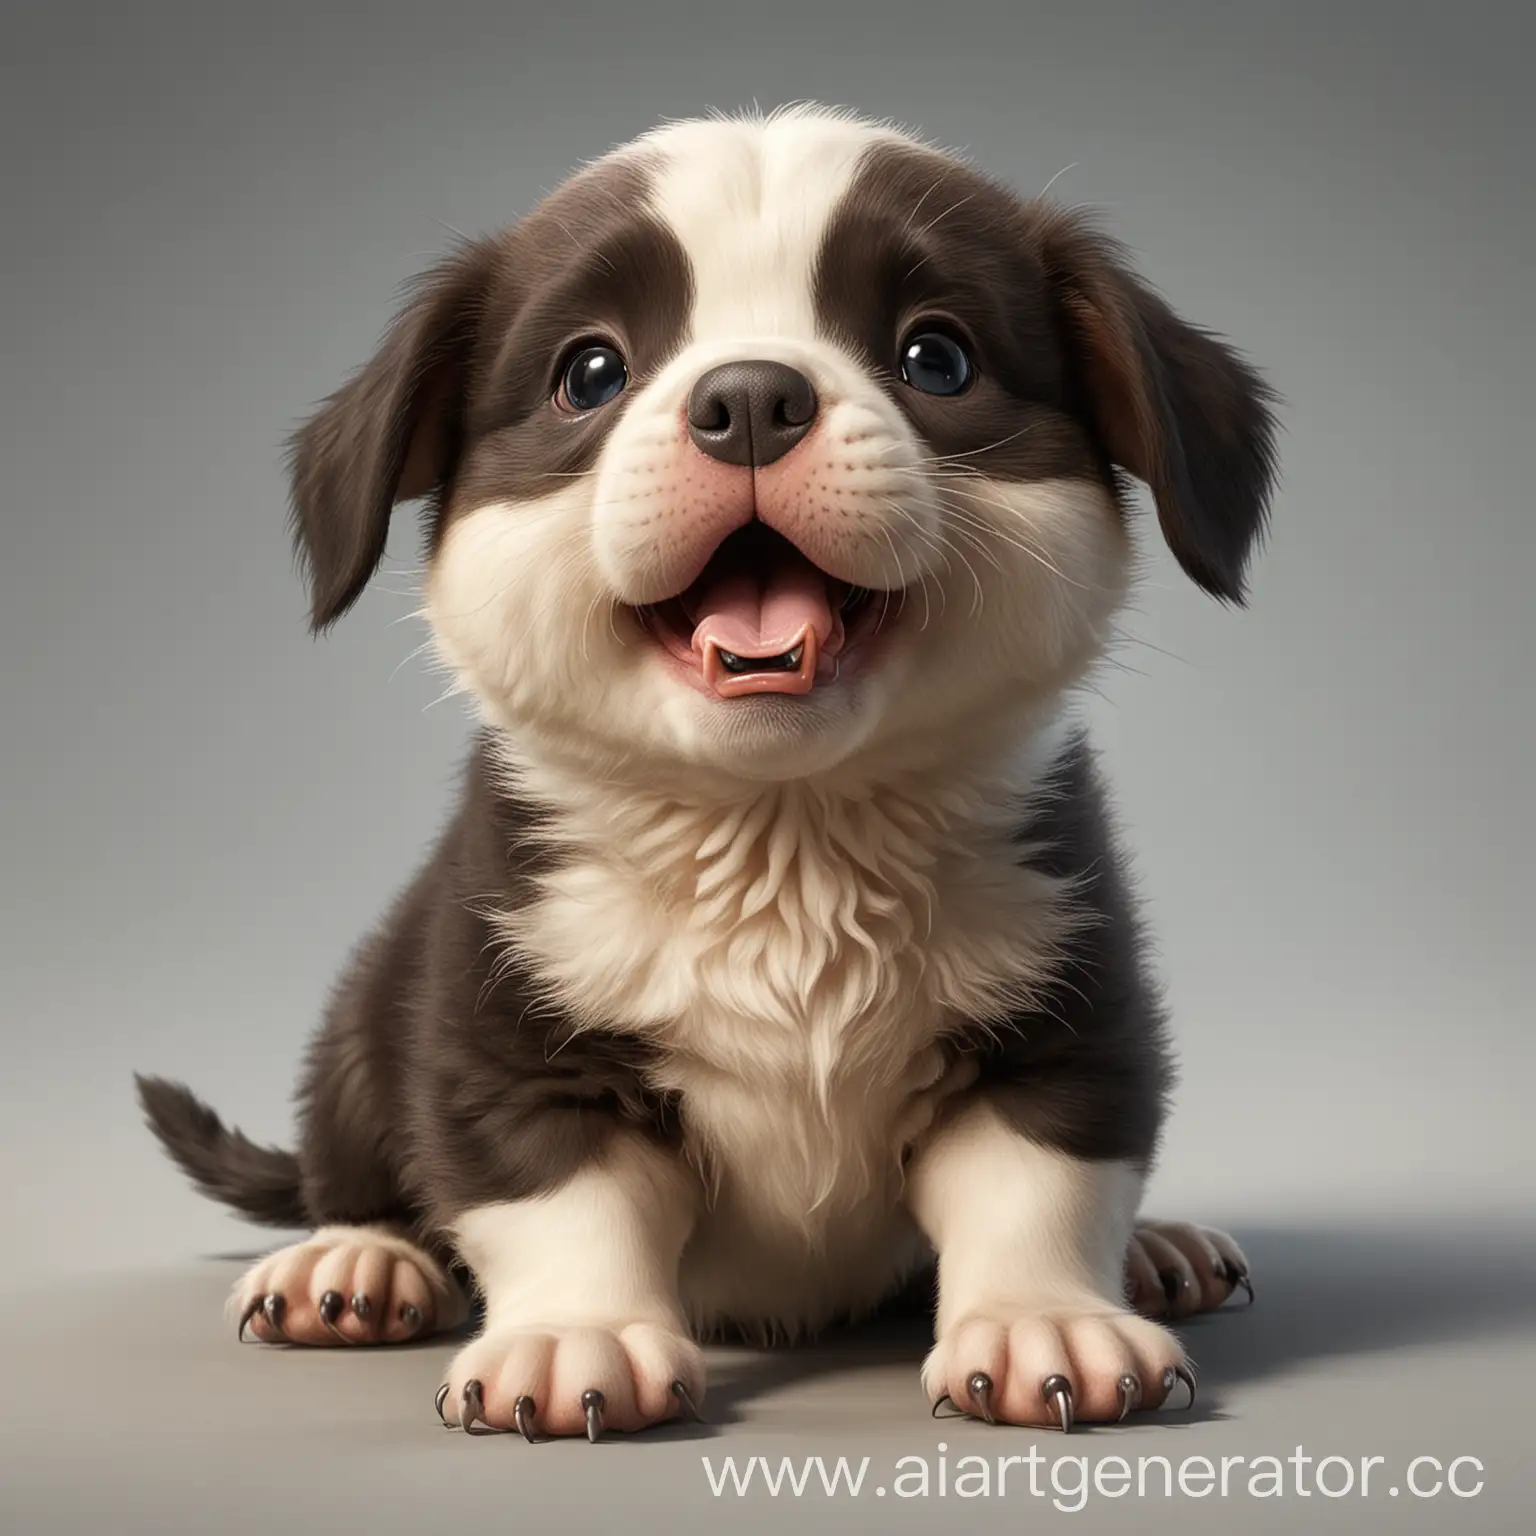 Playful-BeaverYork-Puppy-with-Black-Ears-and-Happy-Expression